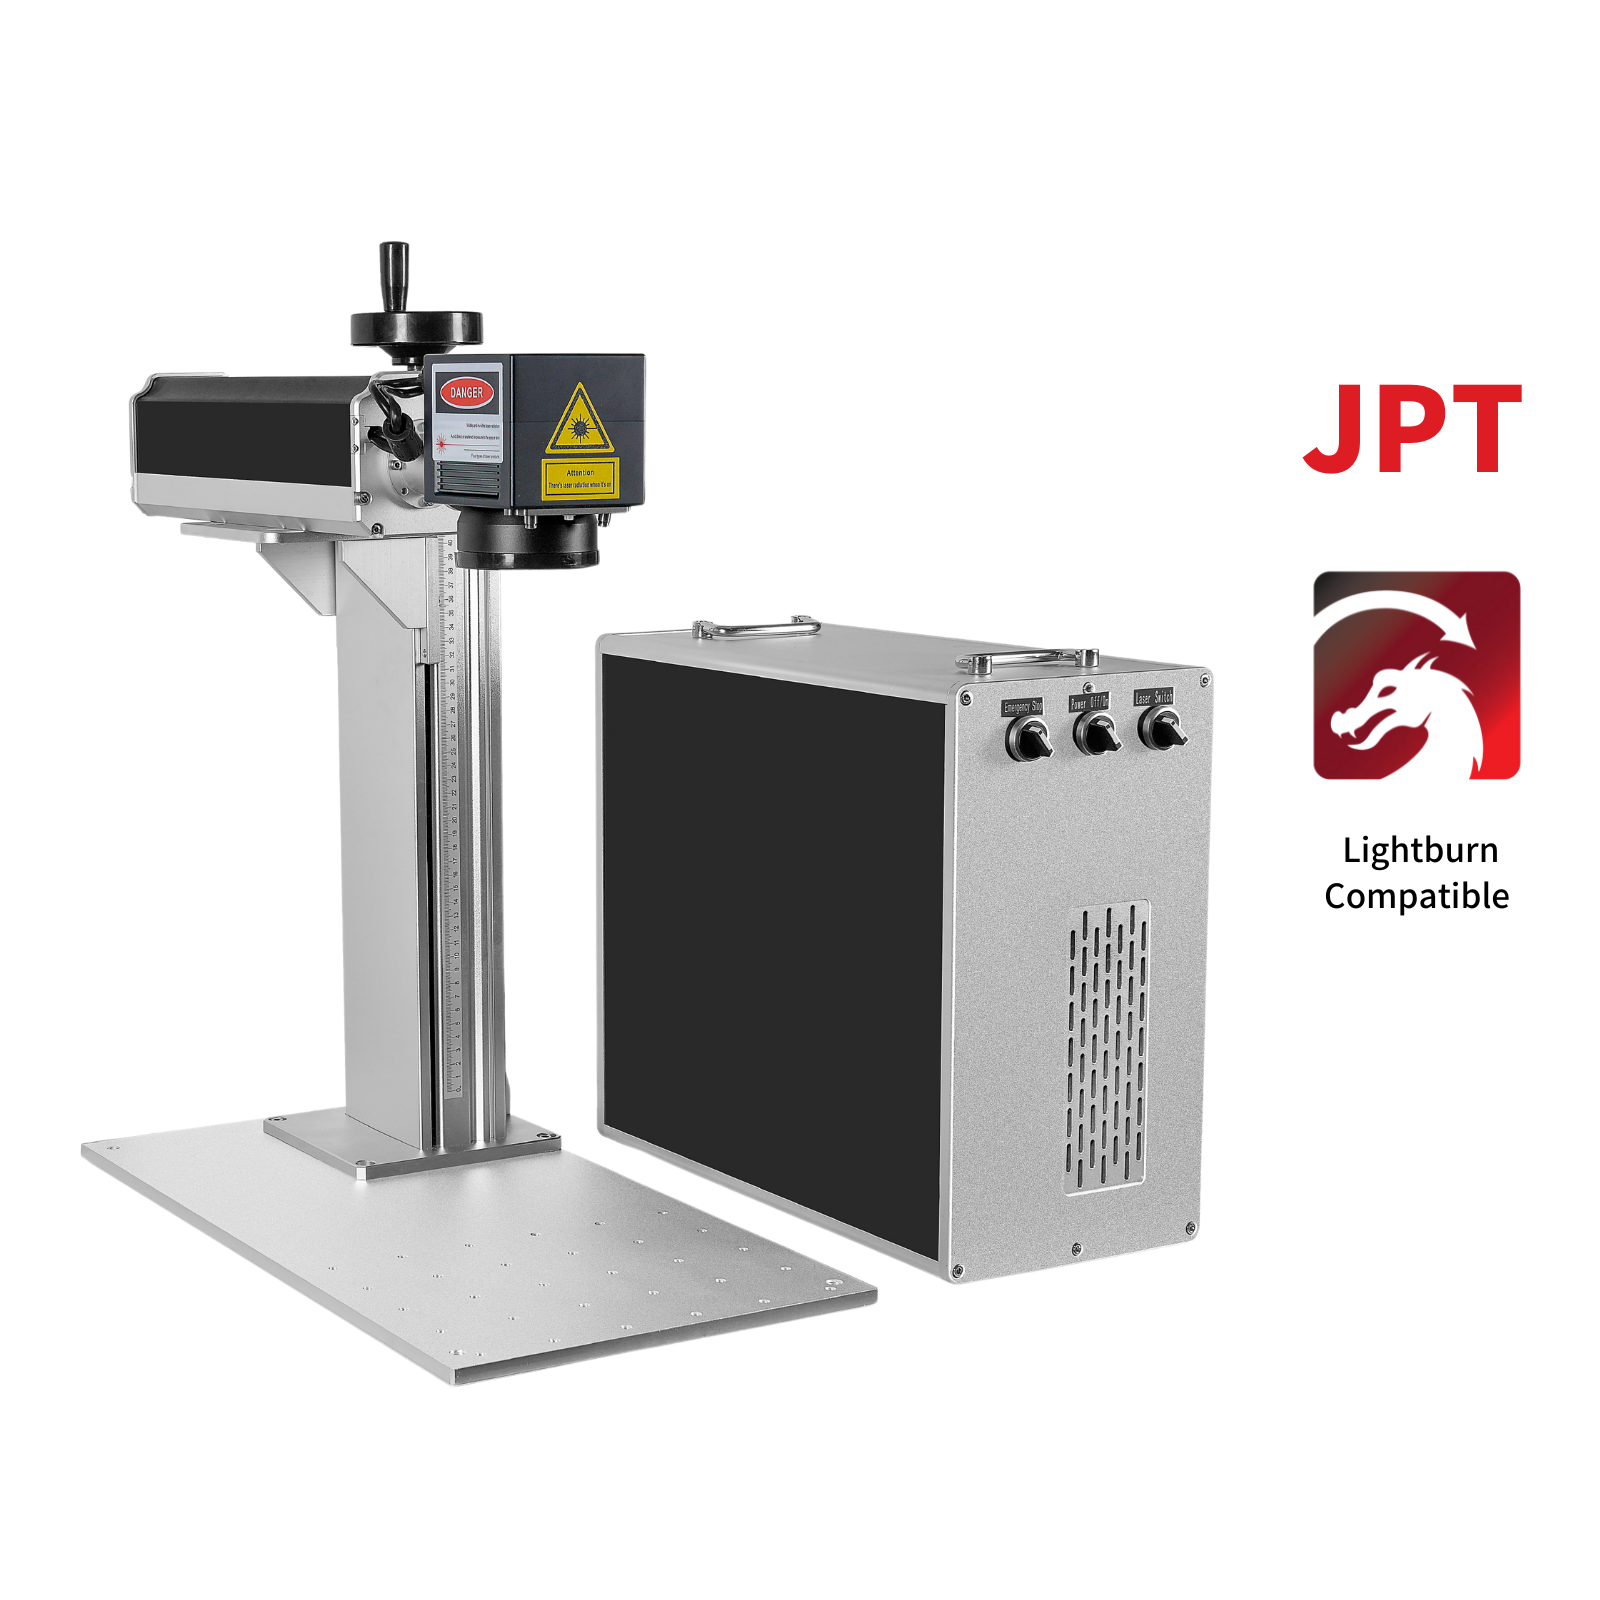 MCWlaser 50W JPT Split Type Fiber Laser Engraver Marking Machine With 8.7” X 8.7“  Working Area  and D80 Rotary For Metal Deep Engraving